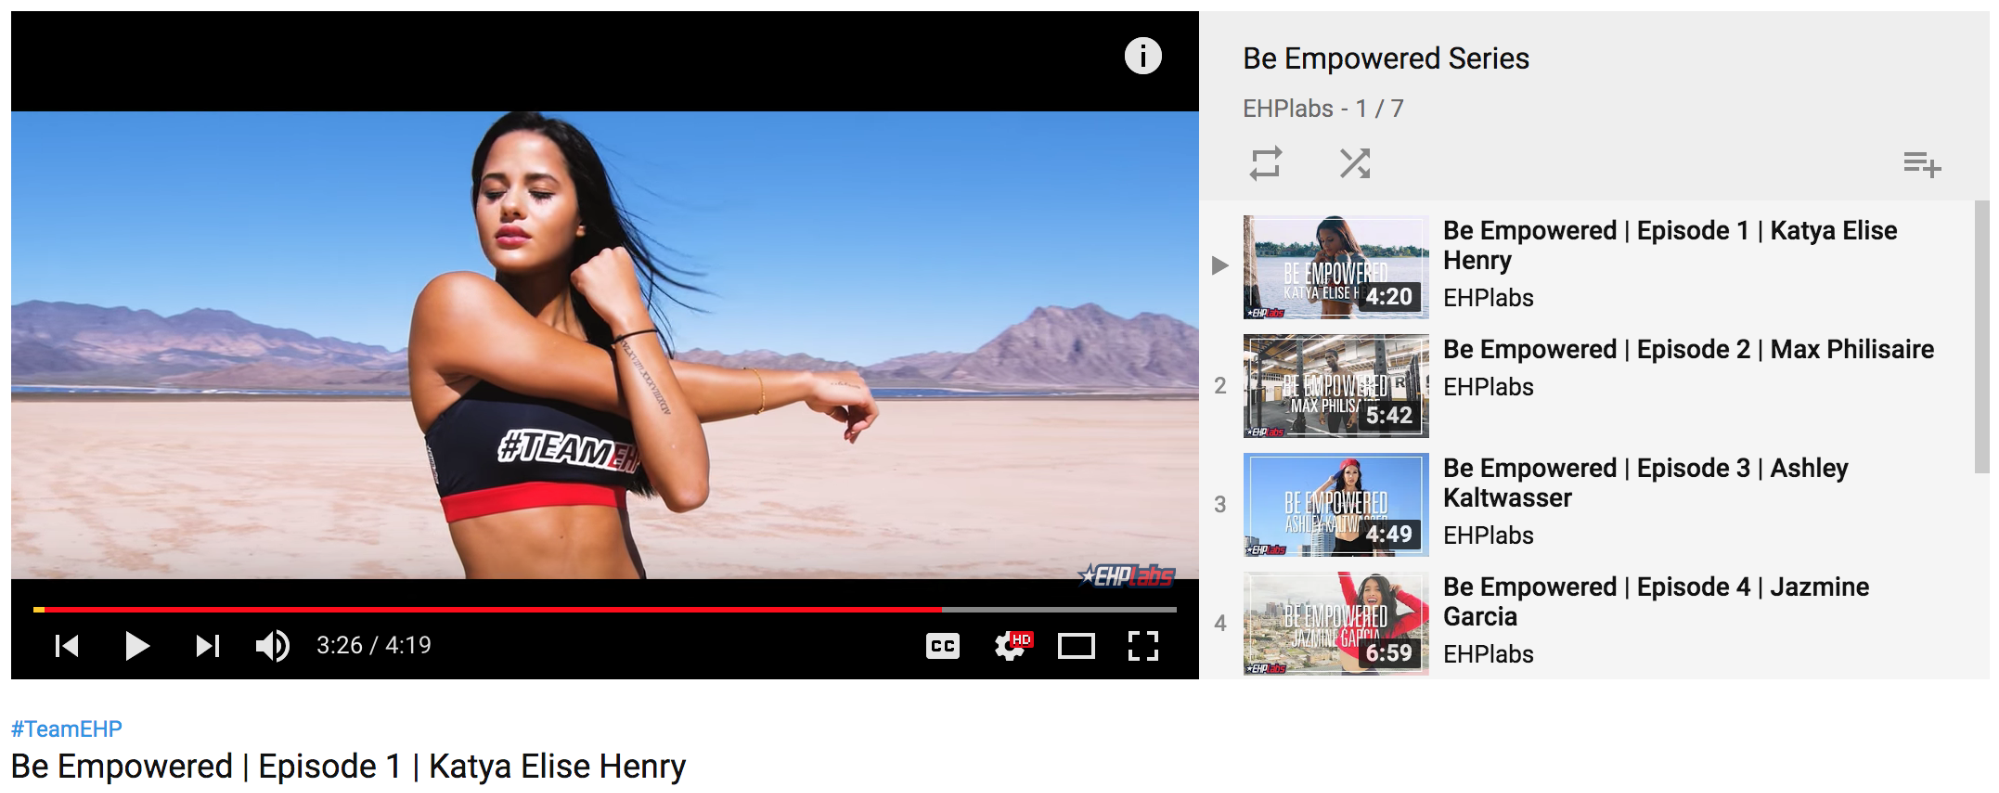 Screenshot showing a youtube video and a playlist